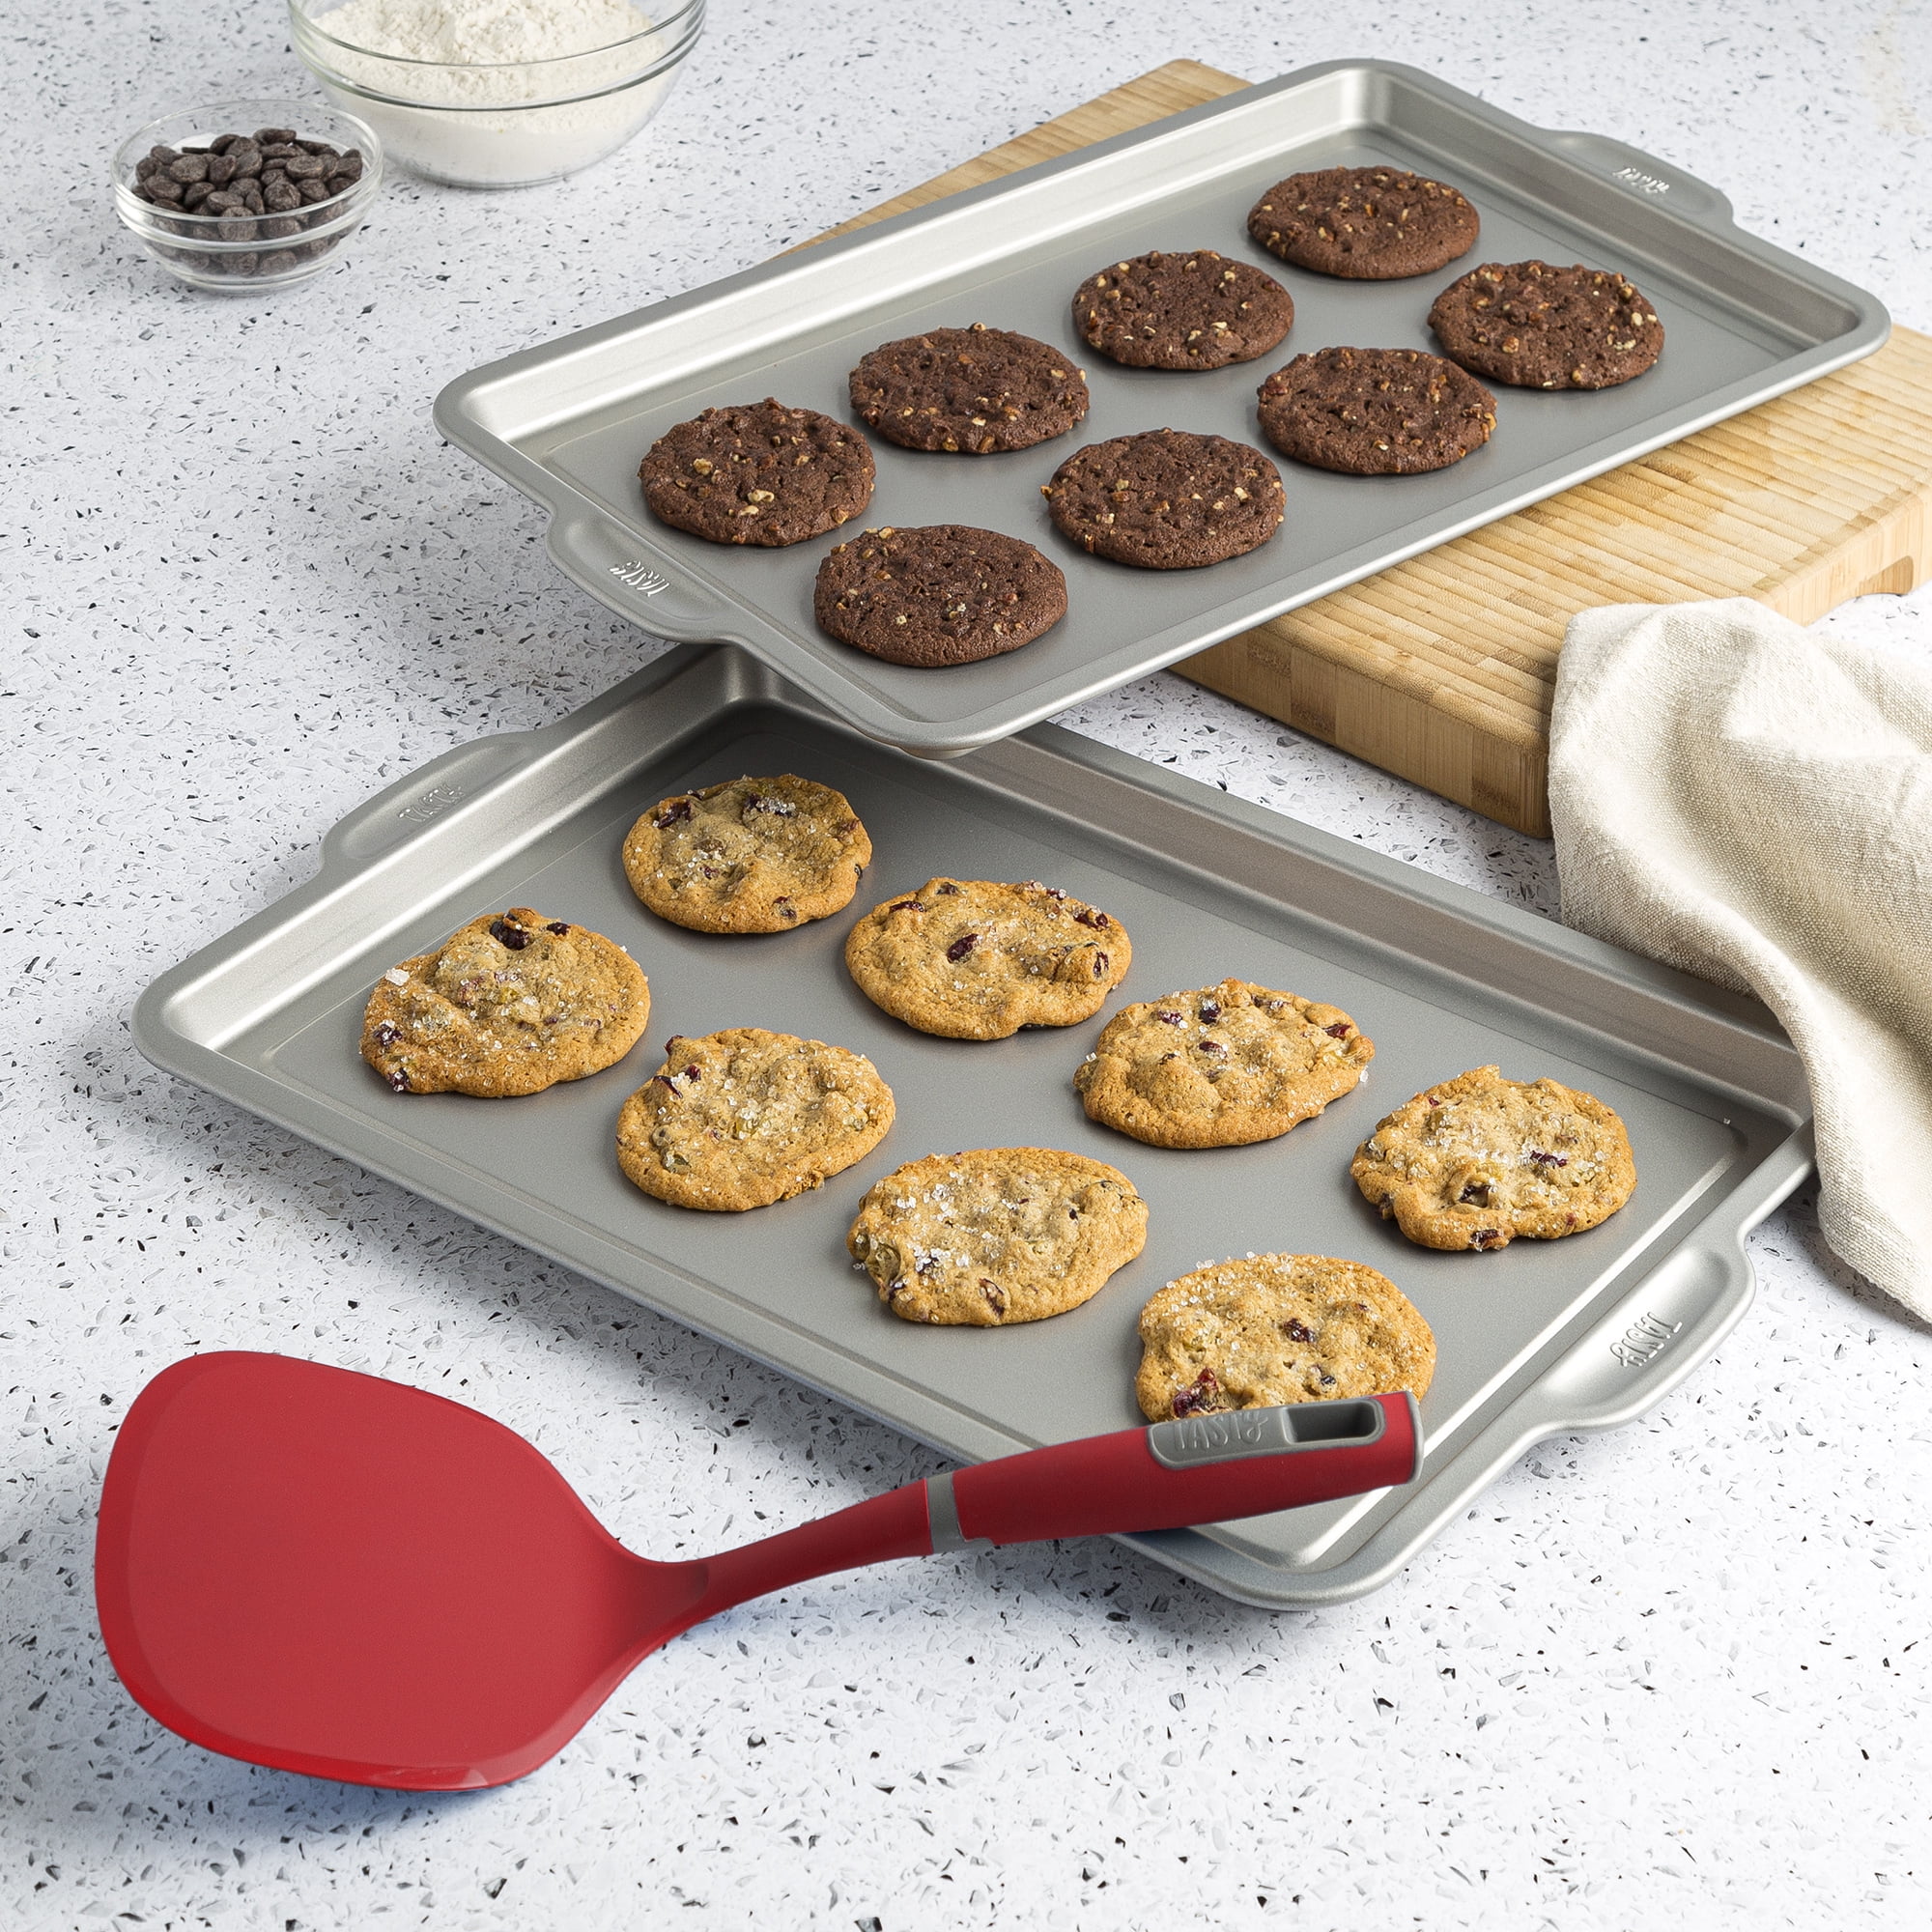 9 x 13 Inch 12-Pack, Commercial Aluminum Cookie Sheets by GRIDMANN, 9 x 13  - Food 4 Less